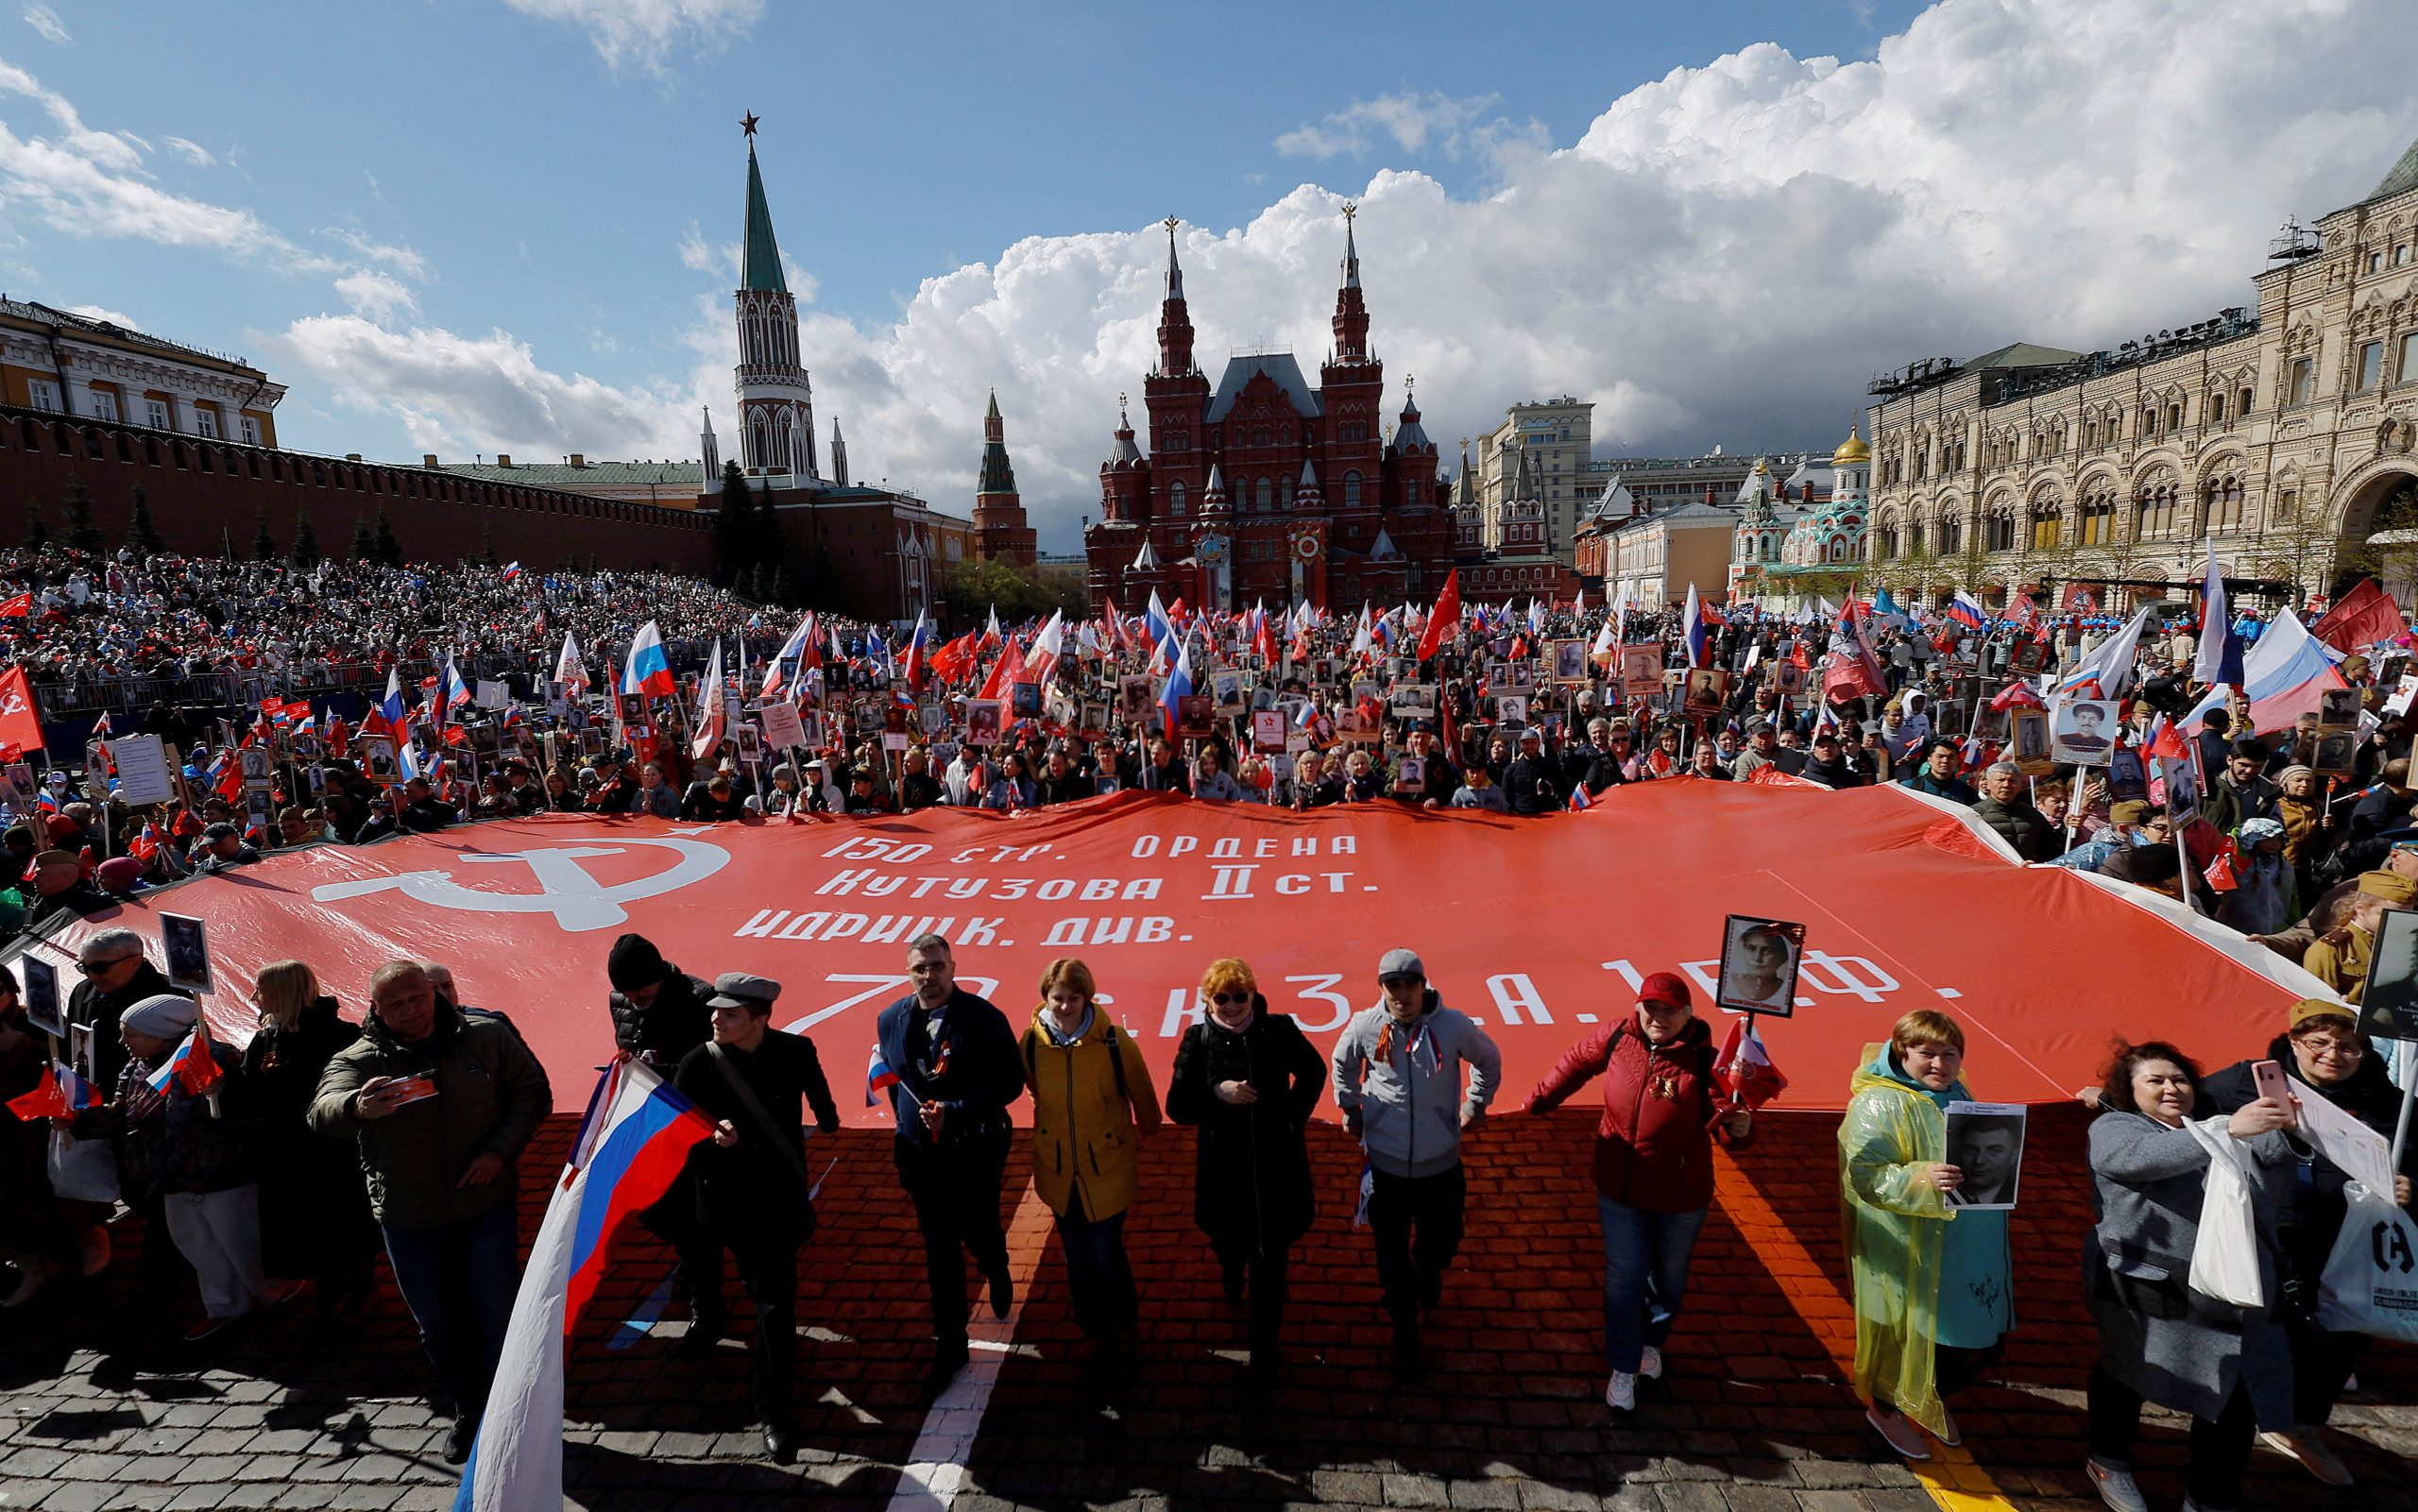 Russian War Report: Russia cancels Victory Day parades and moves “Immortal Regiment” marches online